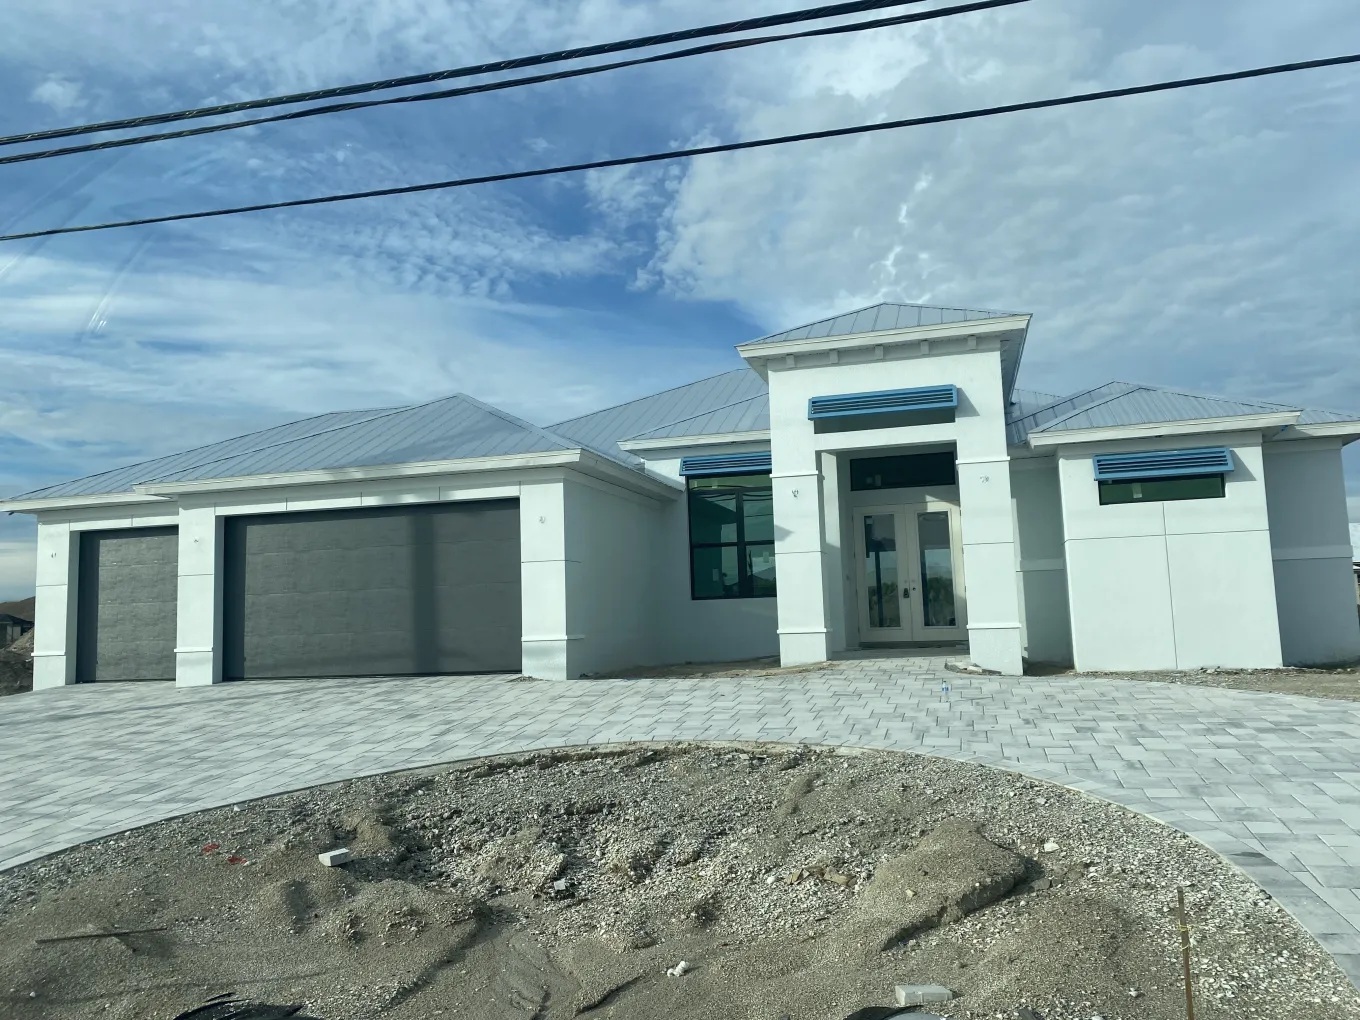 Wise Owl Realty Cape Coral New Construction Homes